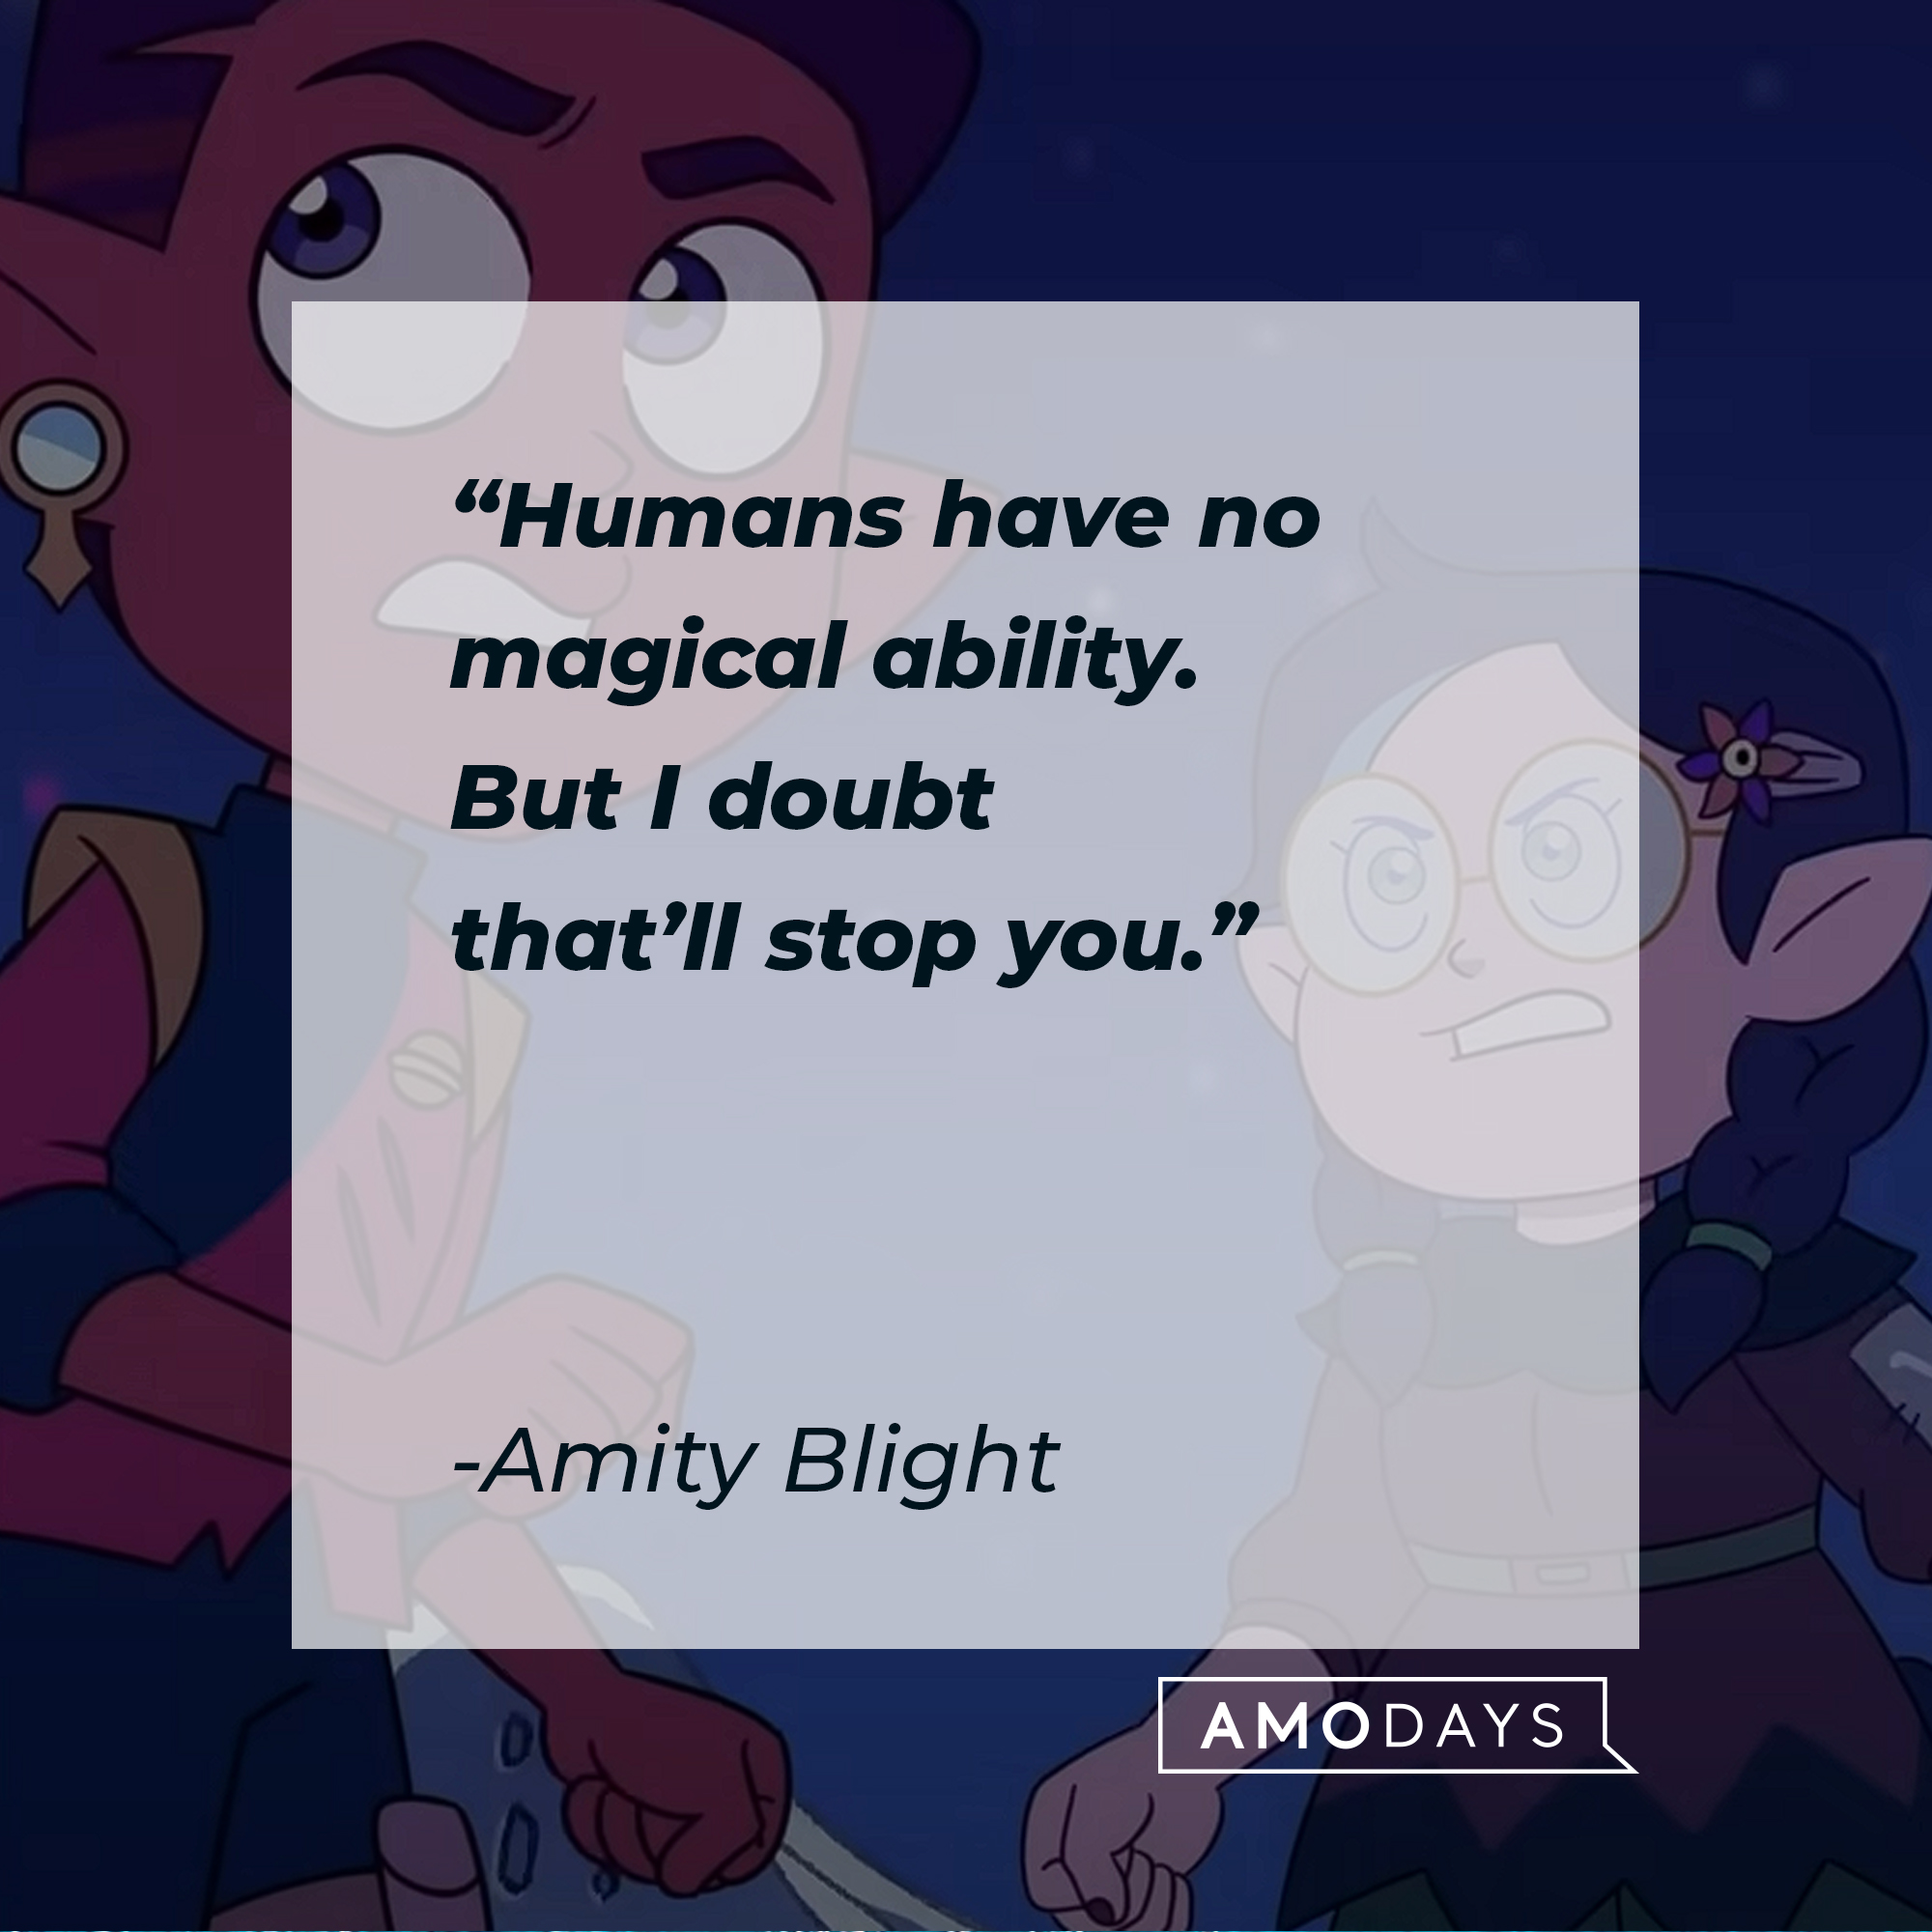 Amity Blight's quote: “Humans have no magical ability. But I doubt that’ll stop you.” | Source: youtube.com/disneychannel